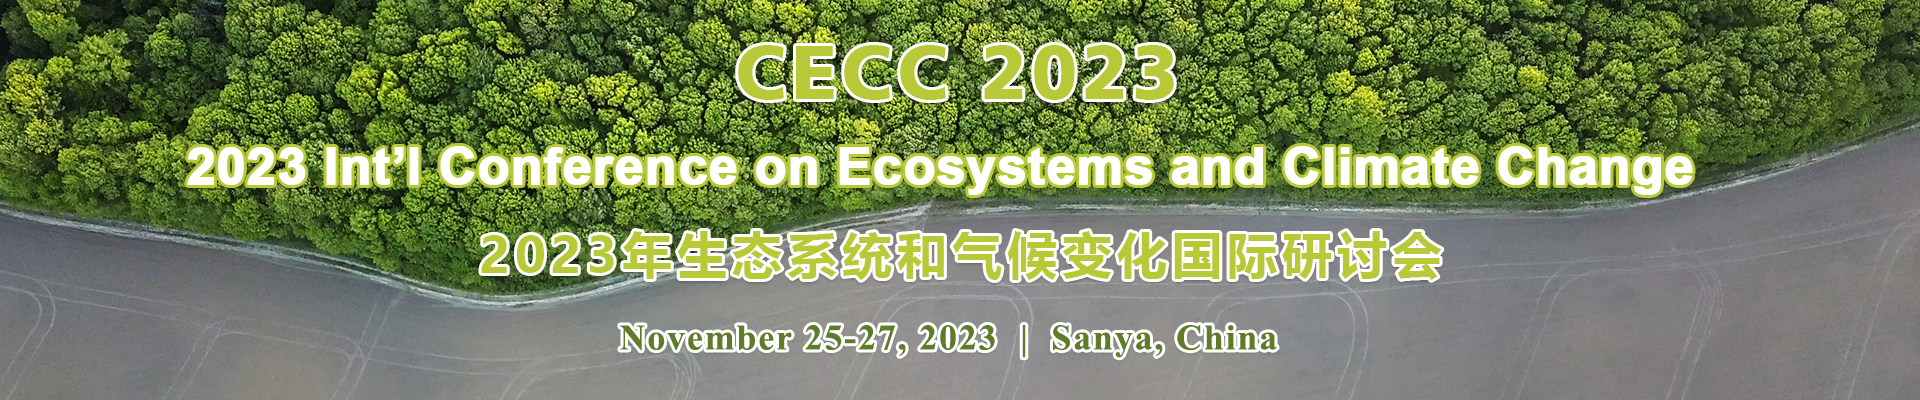 2023 Int’l Conference on Ecosystems and Climate Change (CECC 2023), Online Event